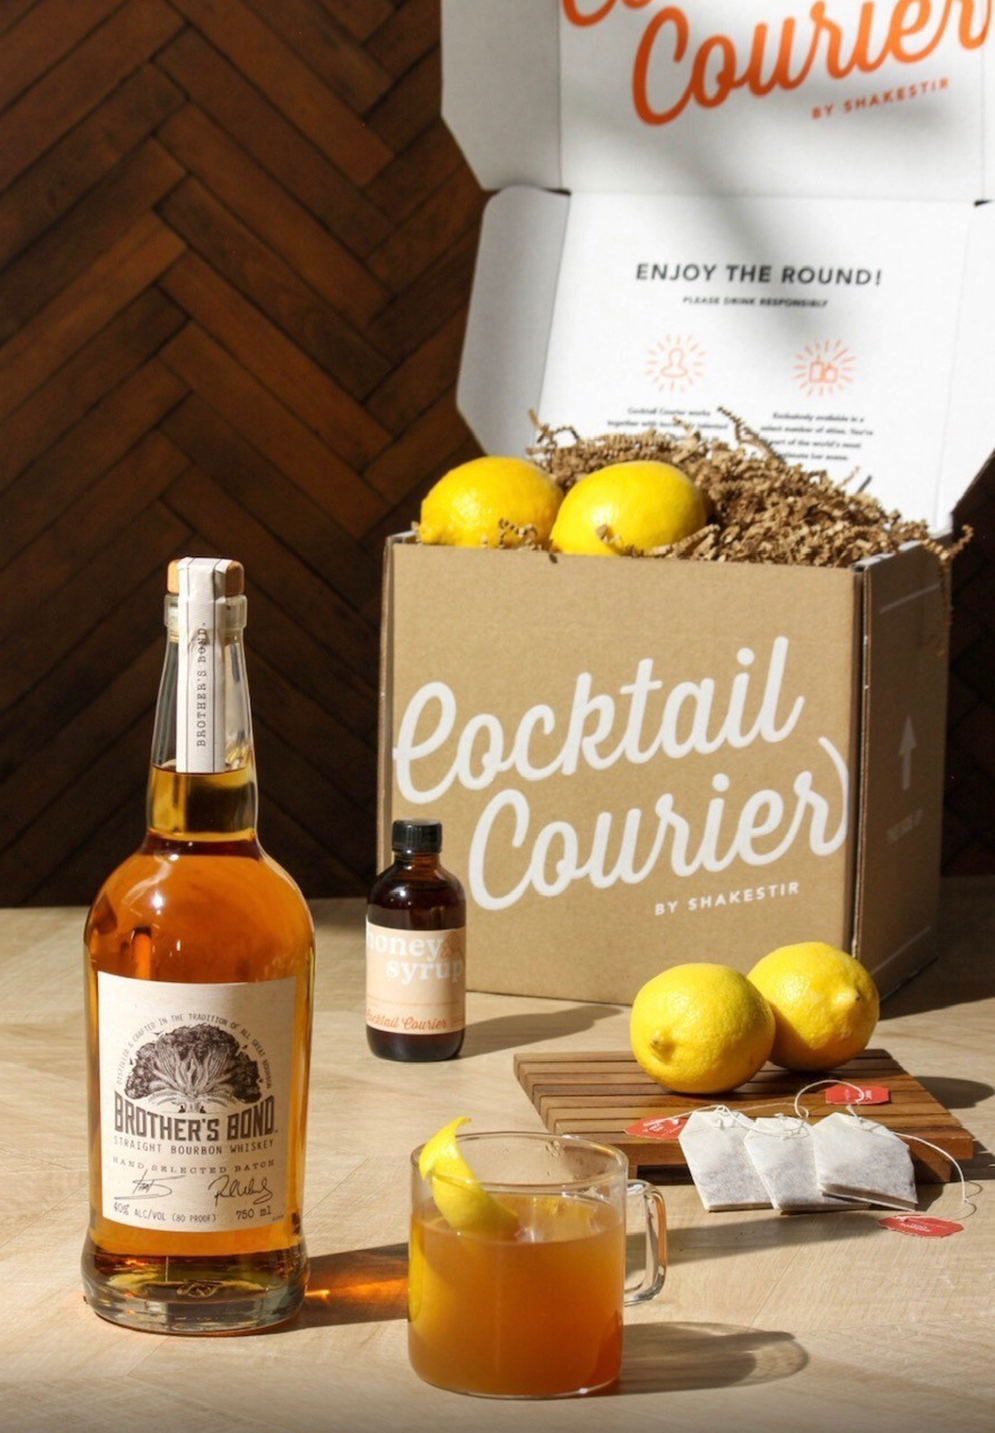 Brother Bond Bourbon's Hot Toddy Cocktail Kit via Cocktail Courier